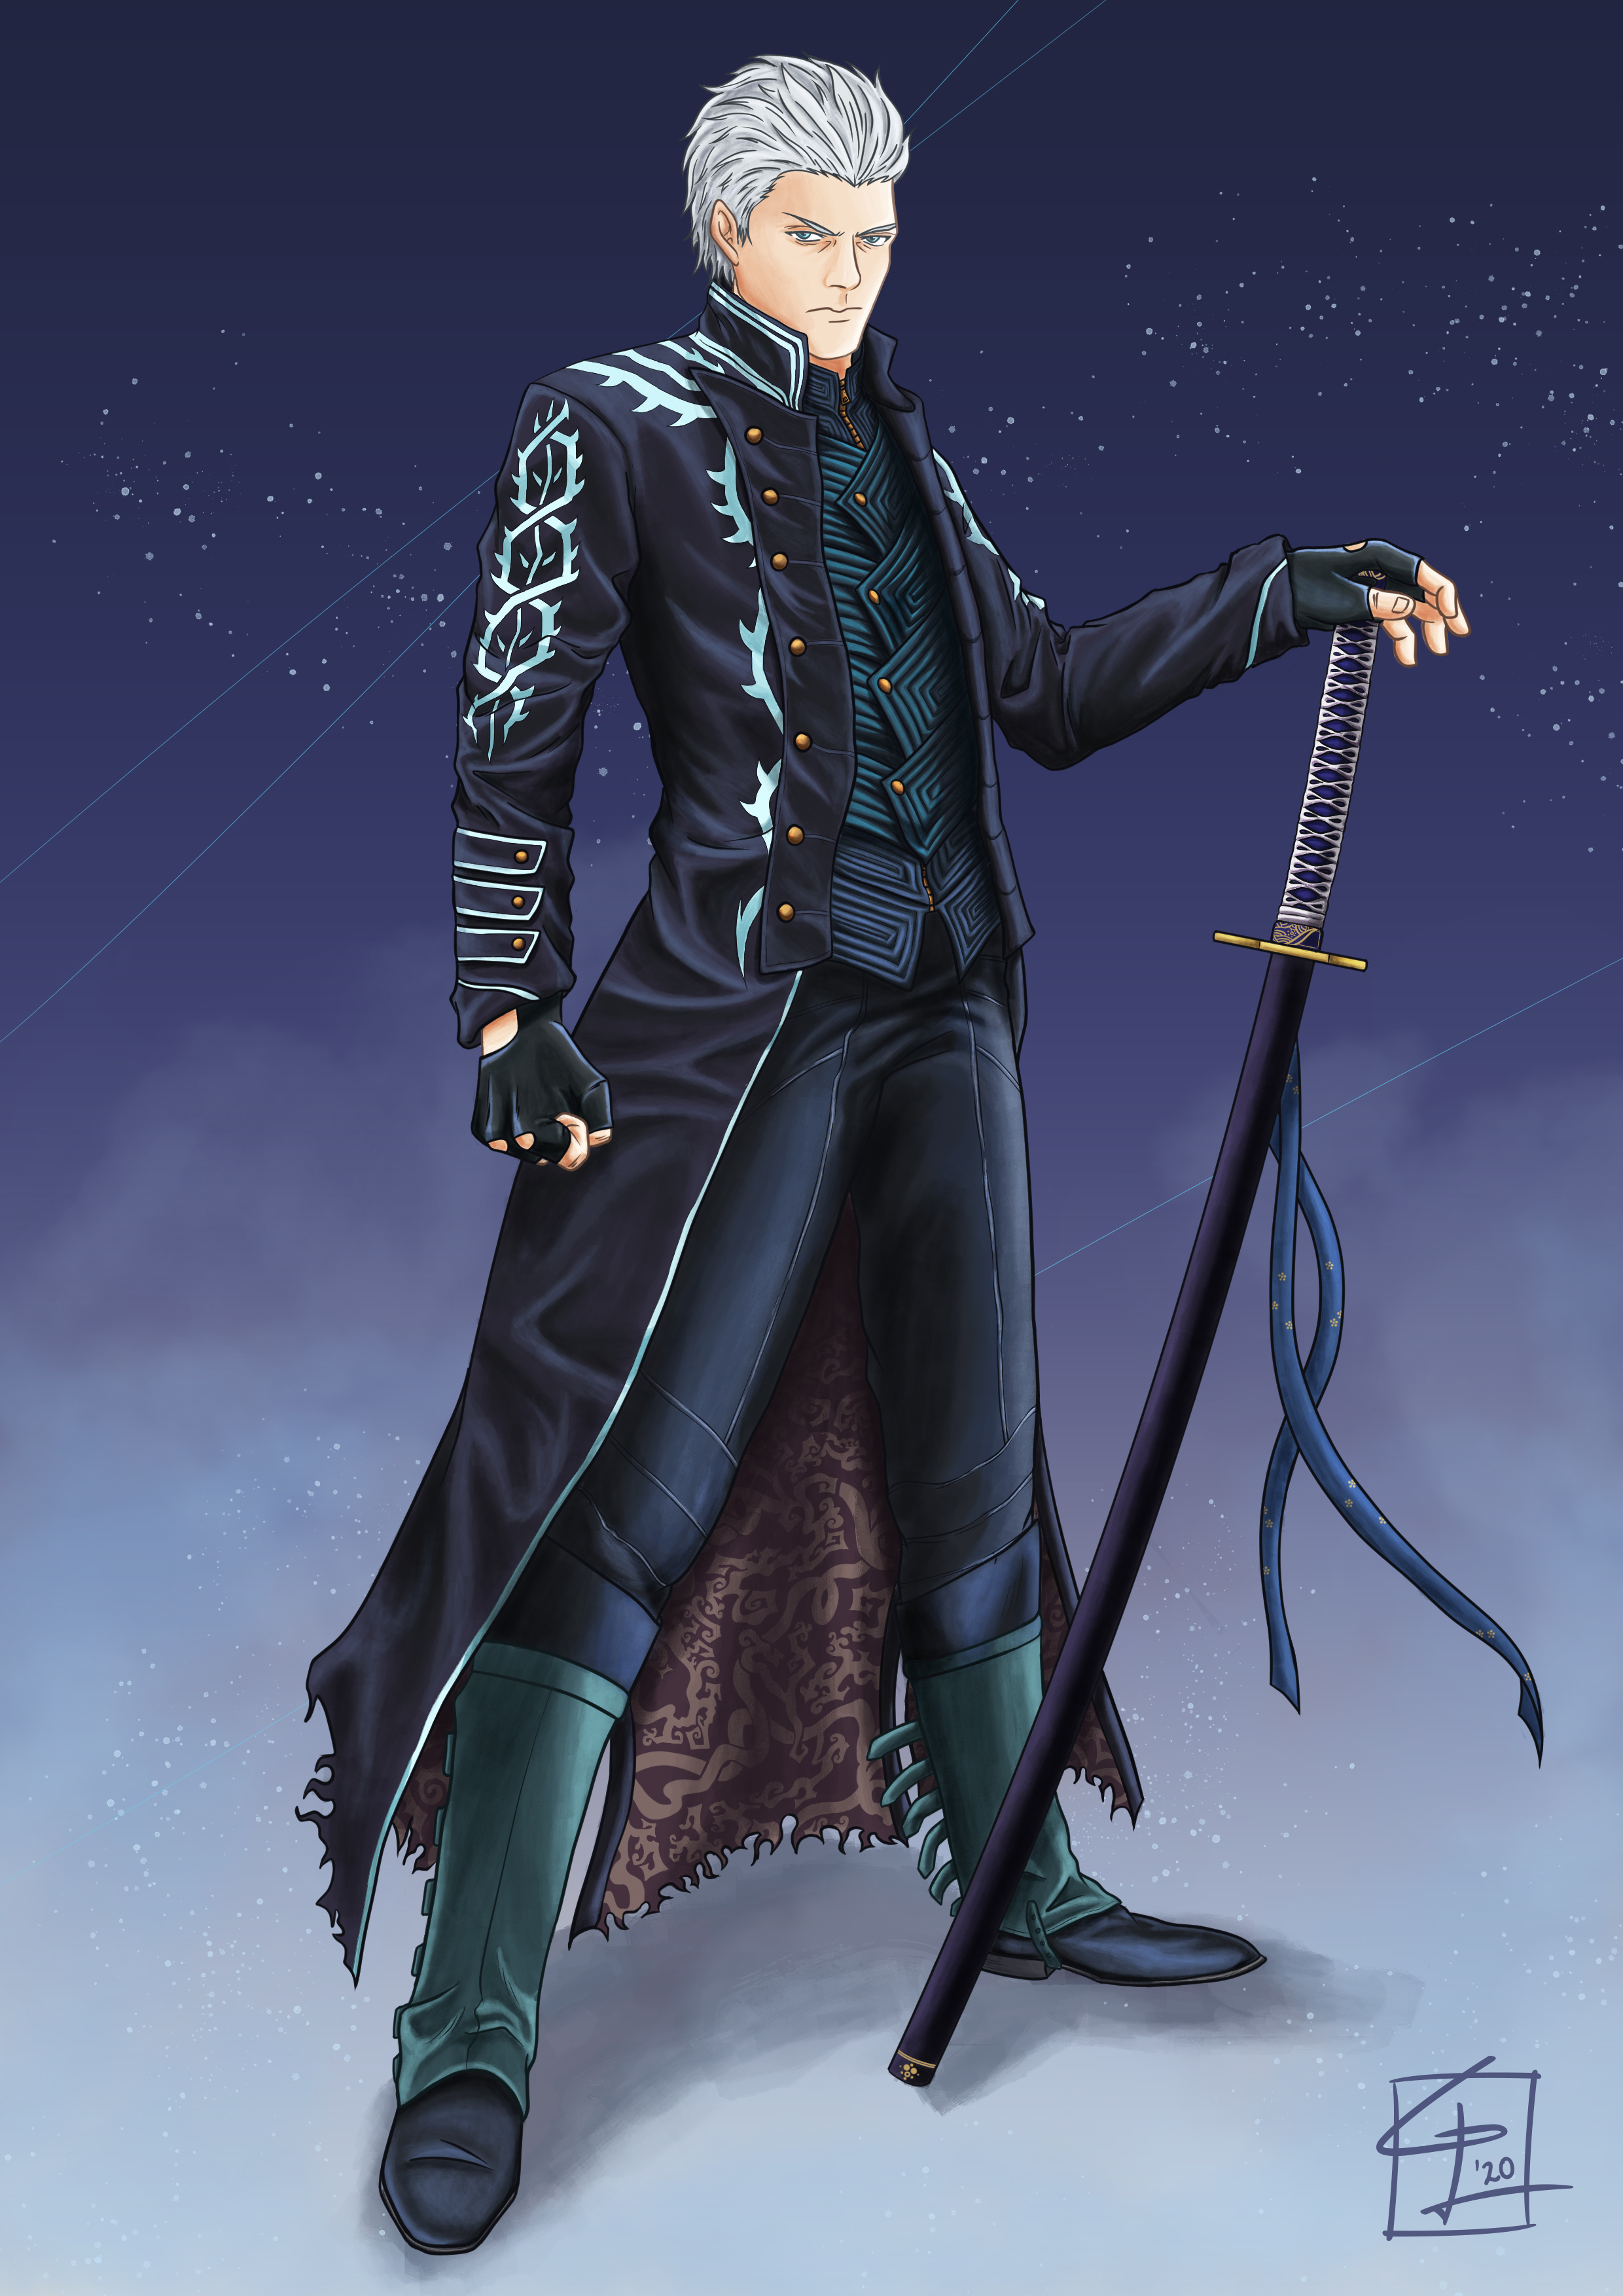 Vergil Devil May Cry 5 by kaelwolfgang on DeviantArt